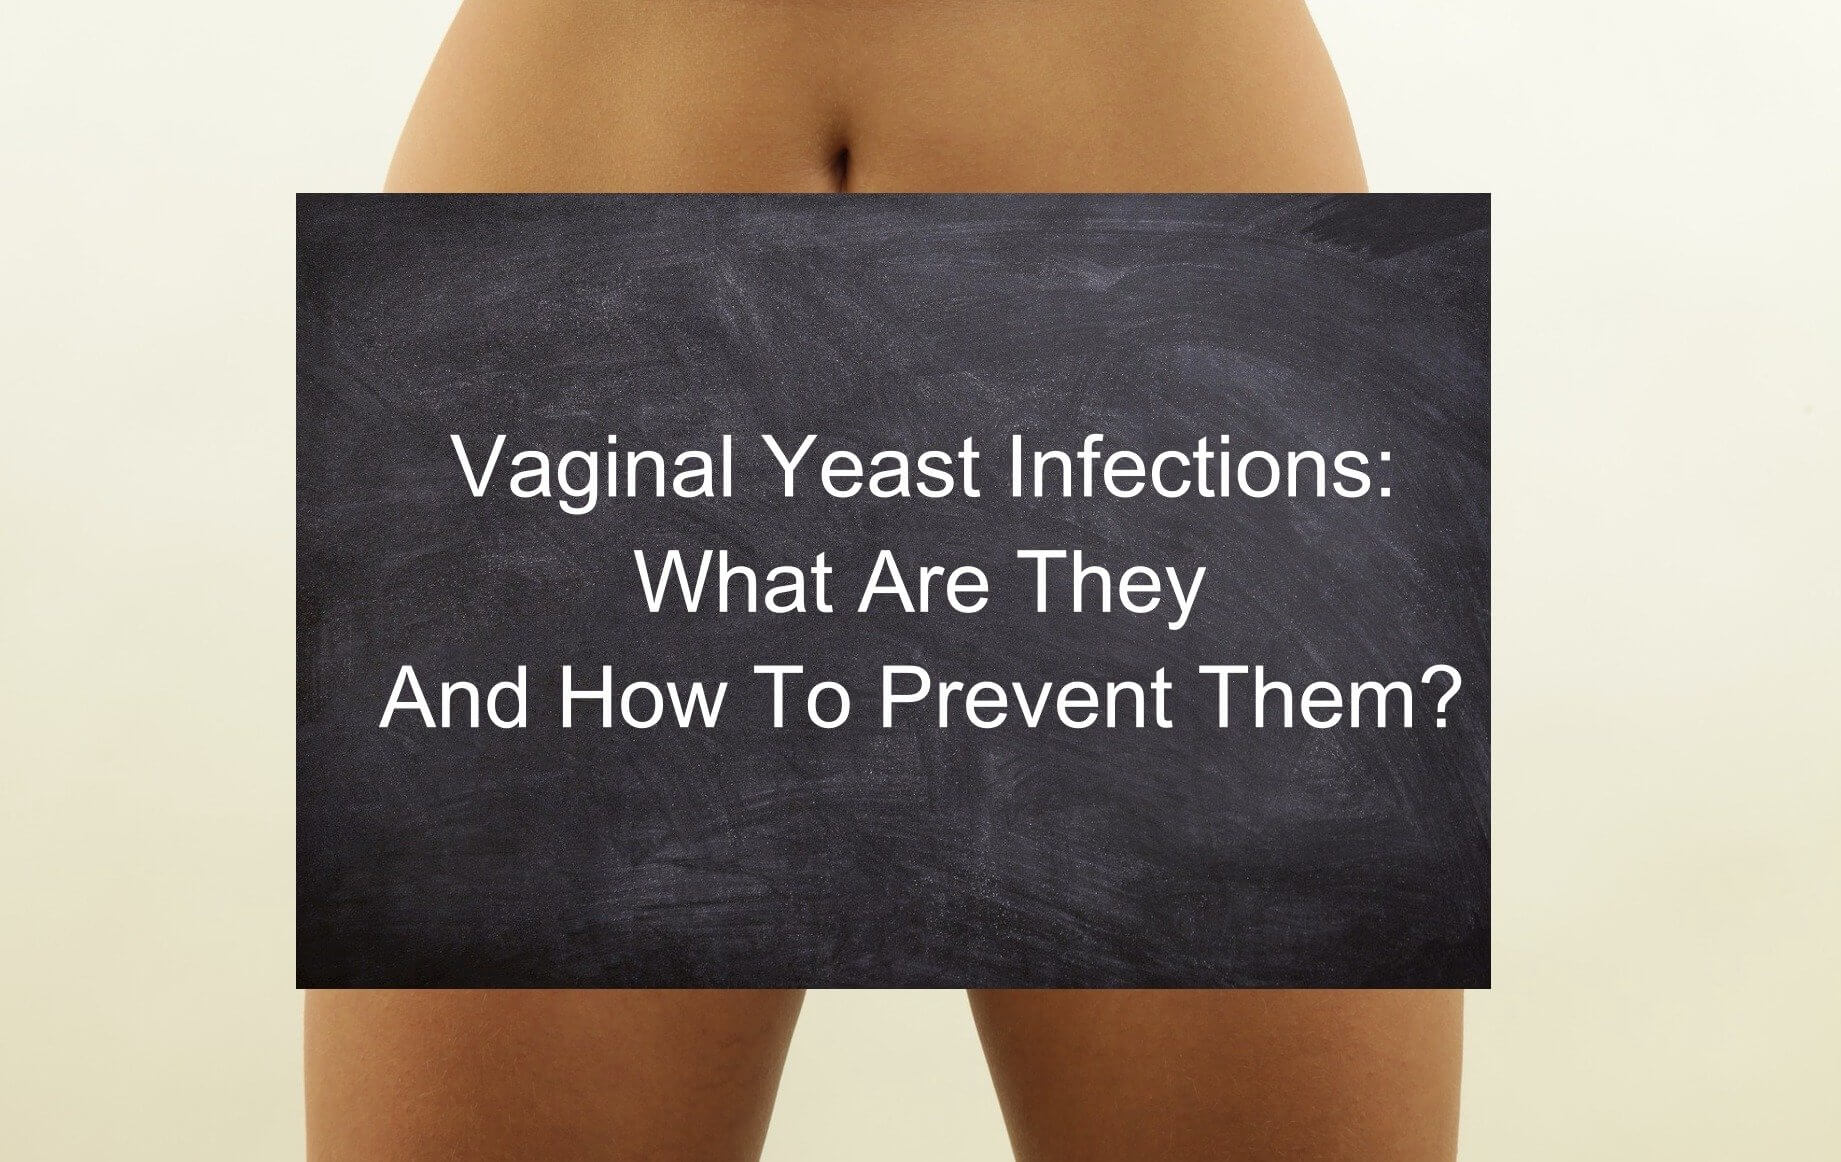 lifestyleug.com__causes vaginal yeast infections (1)